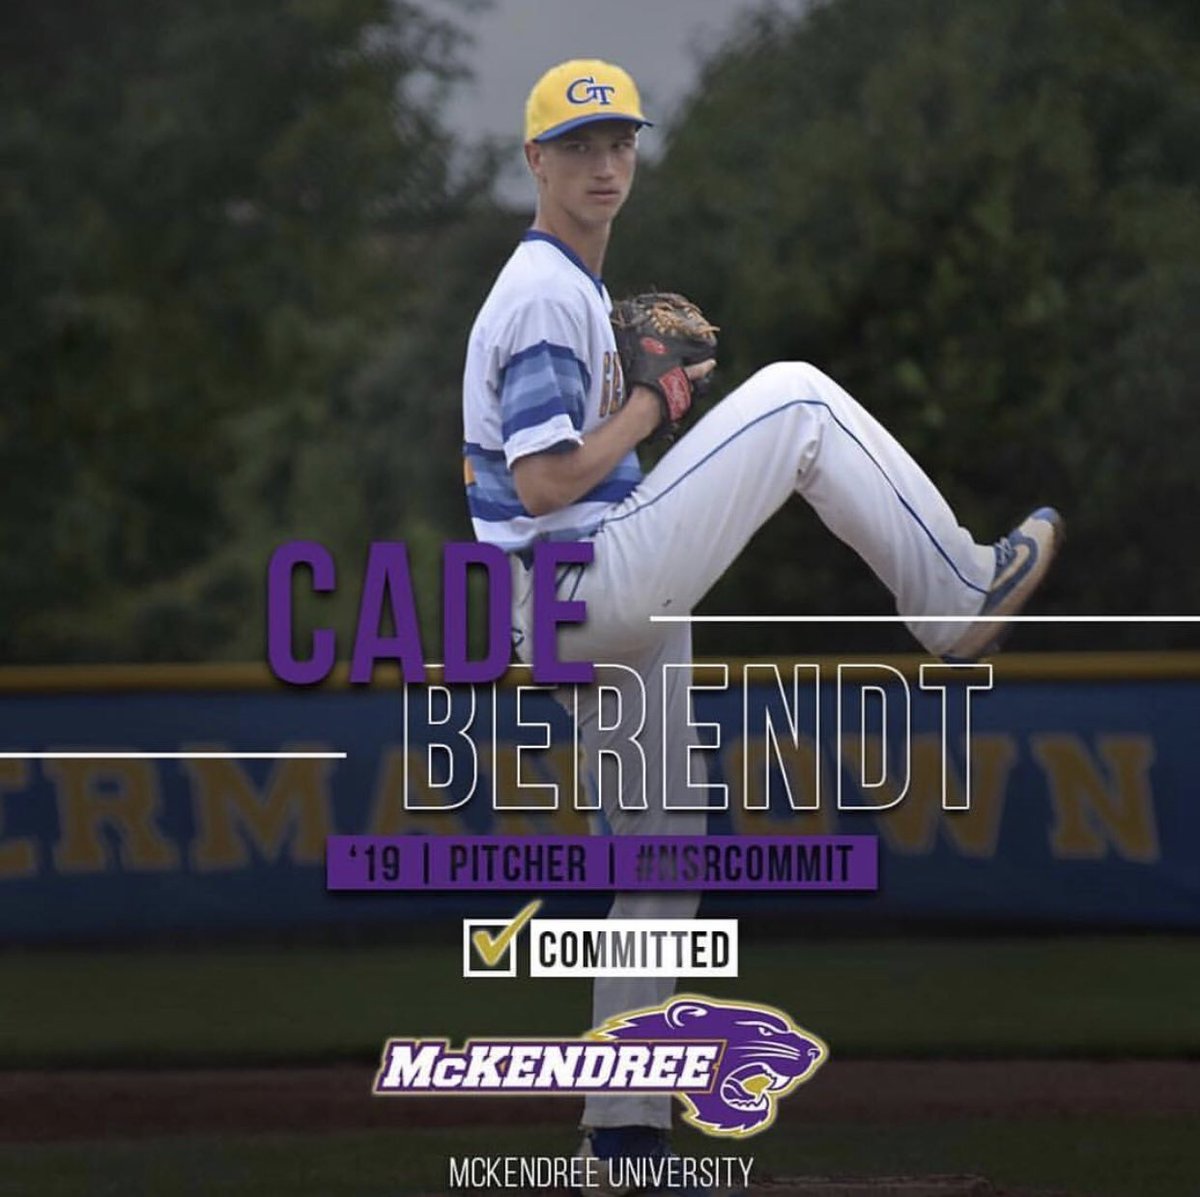 Congrats to our boy Cade Berendt for committing to Mckendree University to continue his baseball career!! Proud of you brotha!! ⚾️💪🏼💥👀 @Cade_Berendt